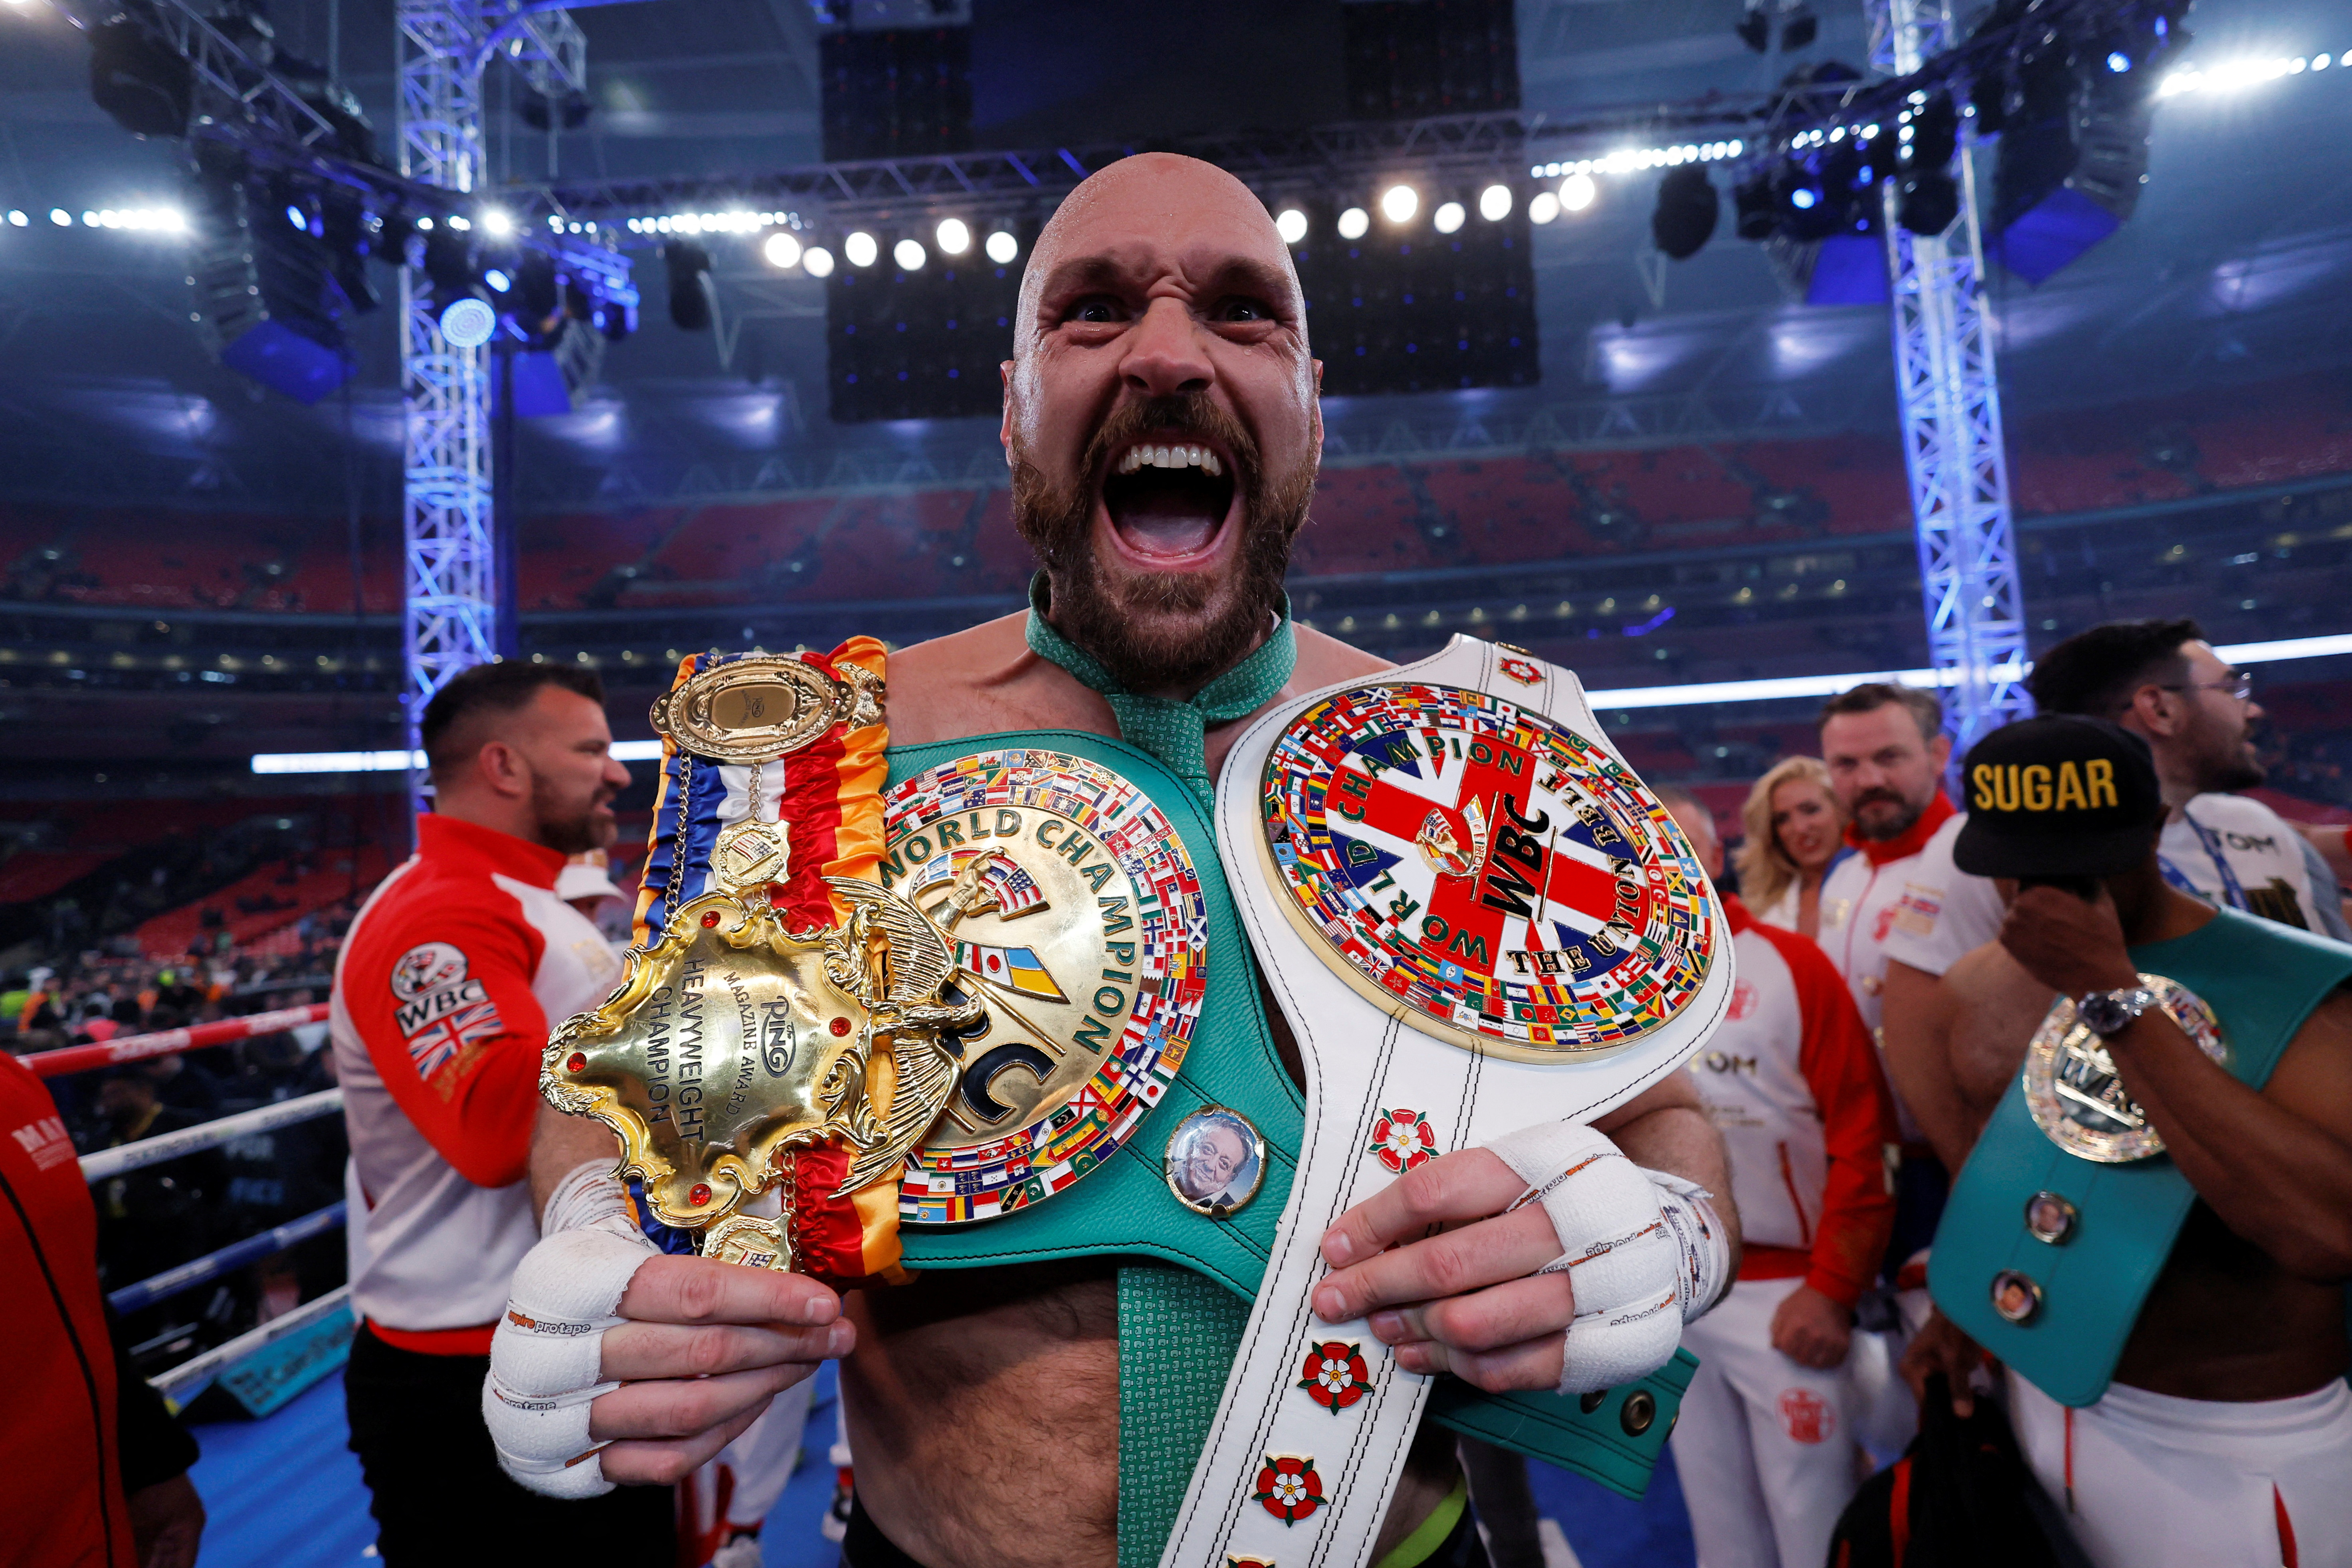 FILE PHOTO: Boxing - Tyson Fury v Dillian Whyte - WBC World Heavyweight Title - Wembley Stadium, London, Britain - April 23, 2022 Tyson Fury celebrates with the belts after winning his fight against Dillian Whyte Action Images via Reuters/Andrew Couldridge/File Photo